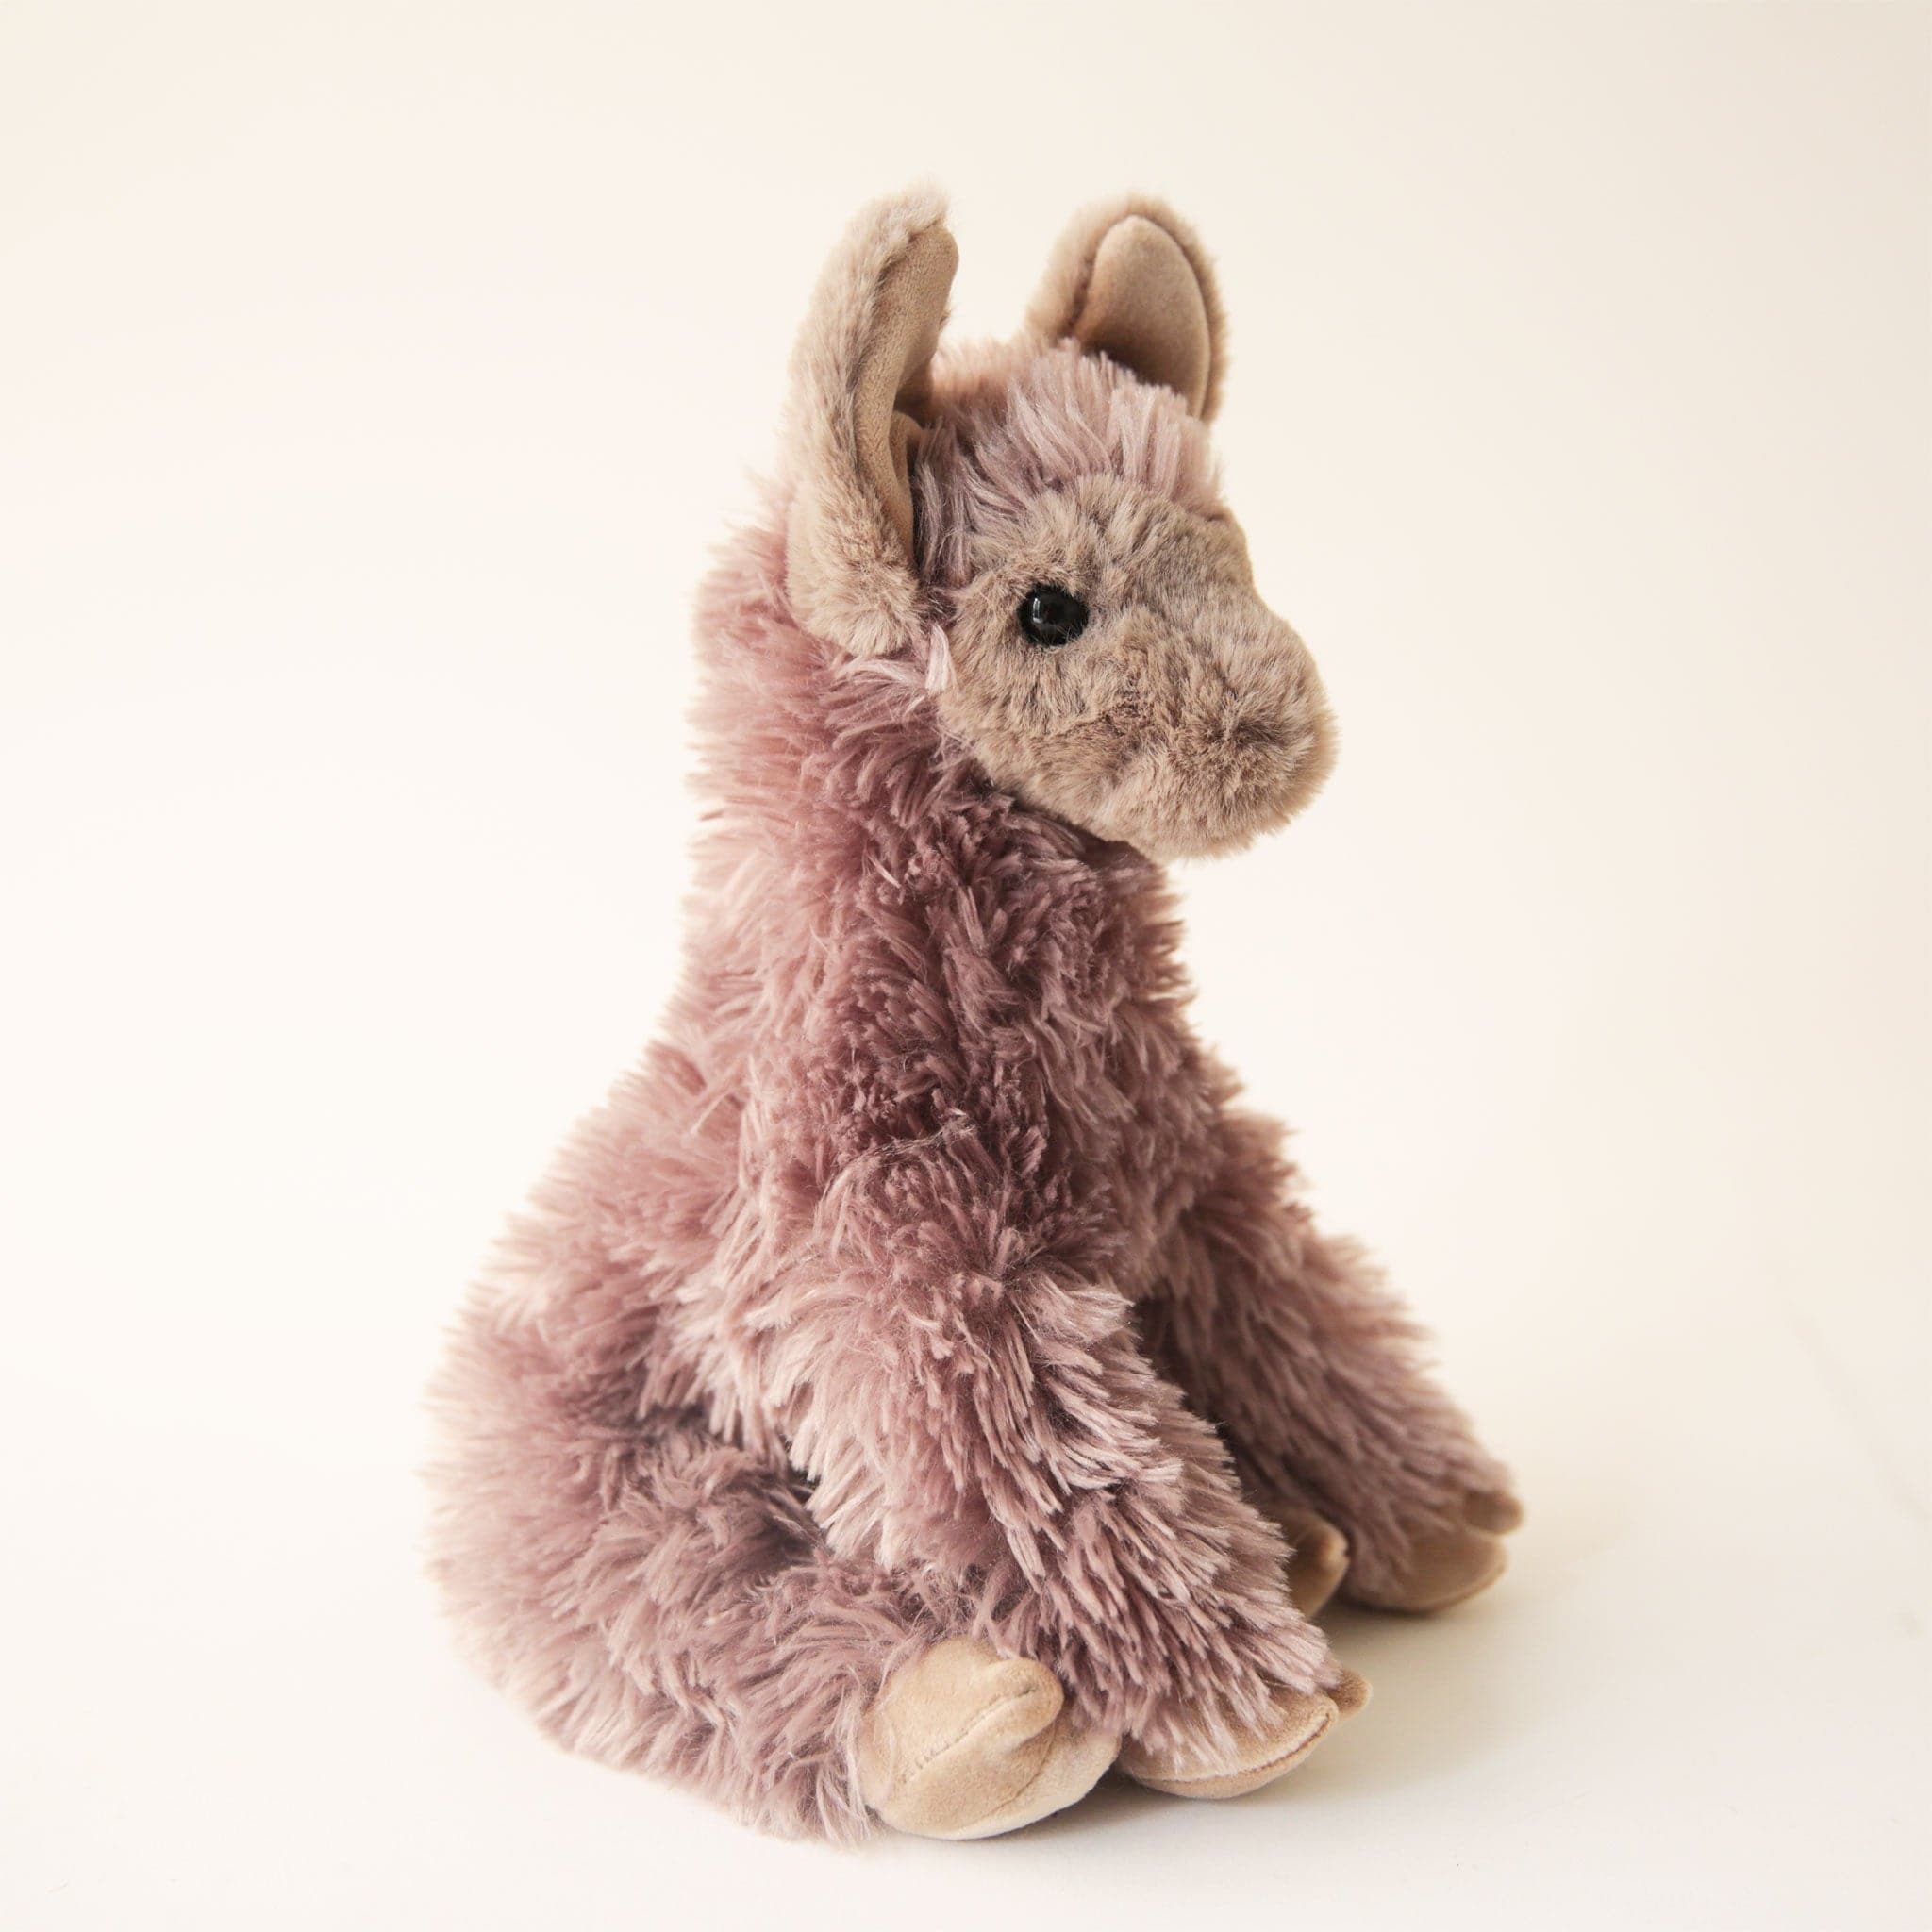 A super fuzzy llama with taupe colored fur and a relaxed posture perfect for snuggling. 